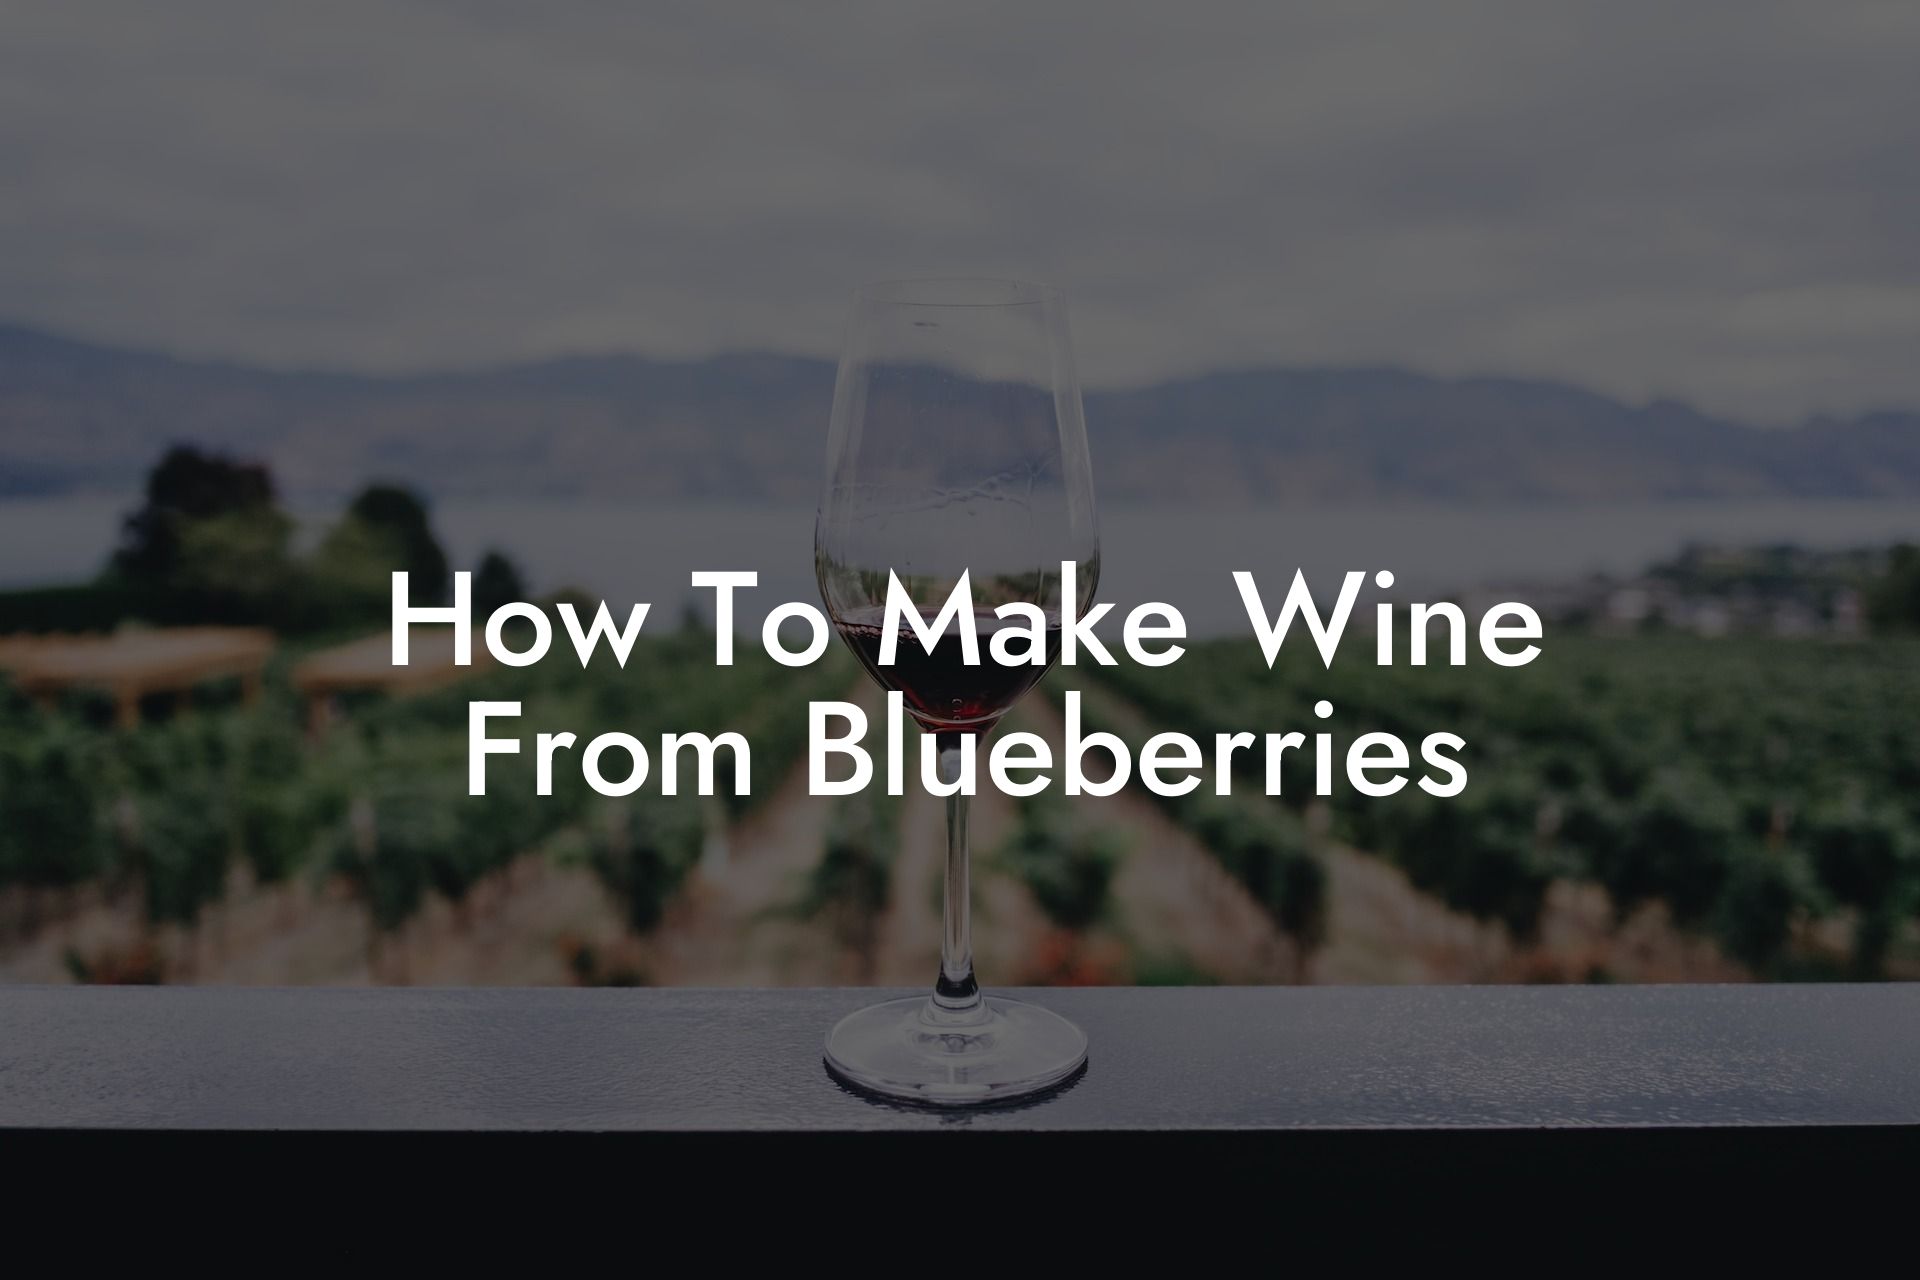 How To Make Wine From Blueberries